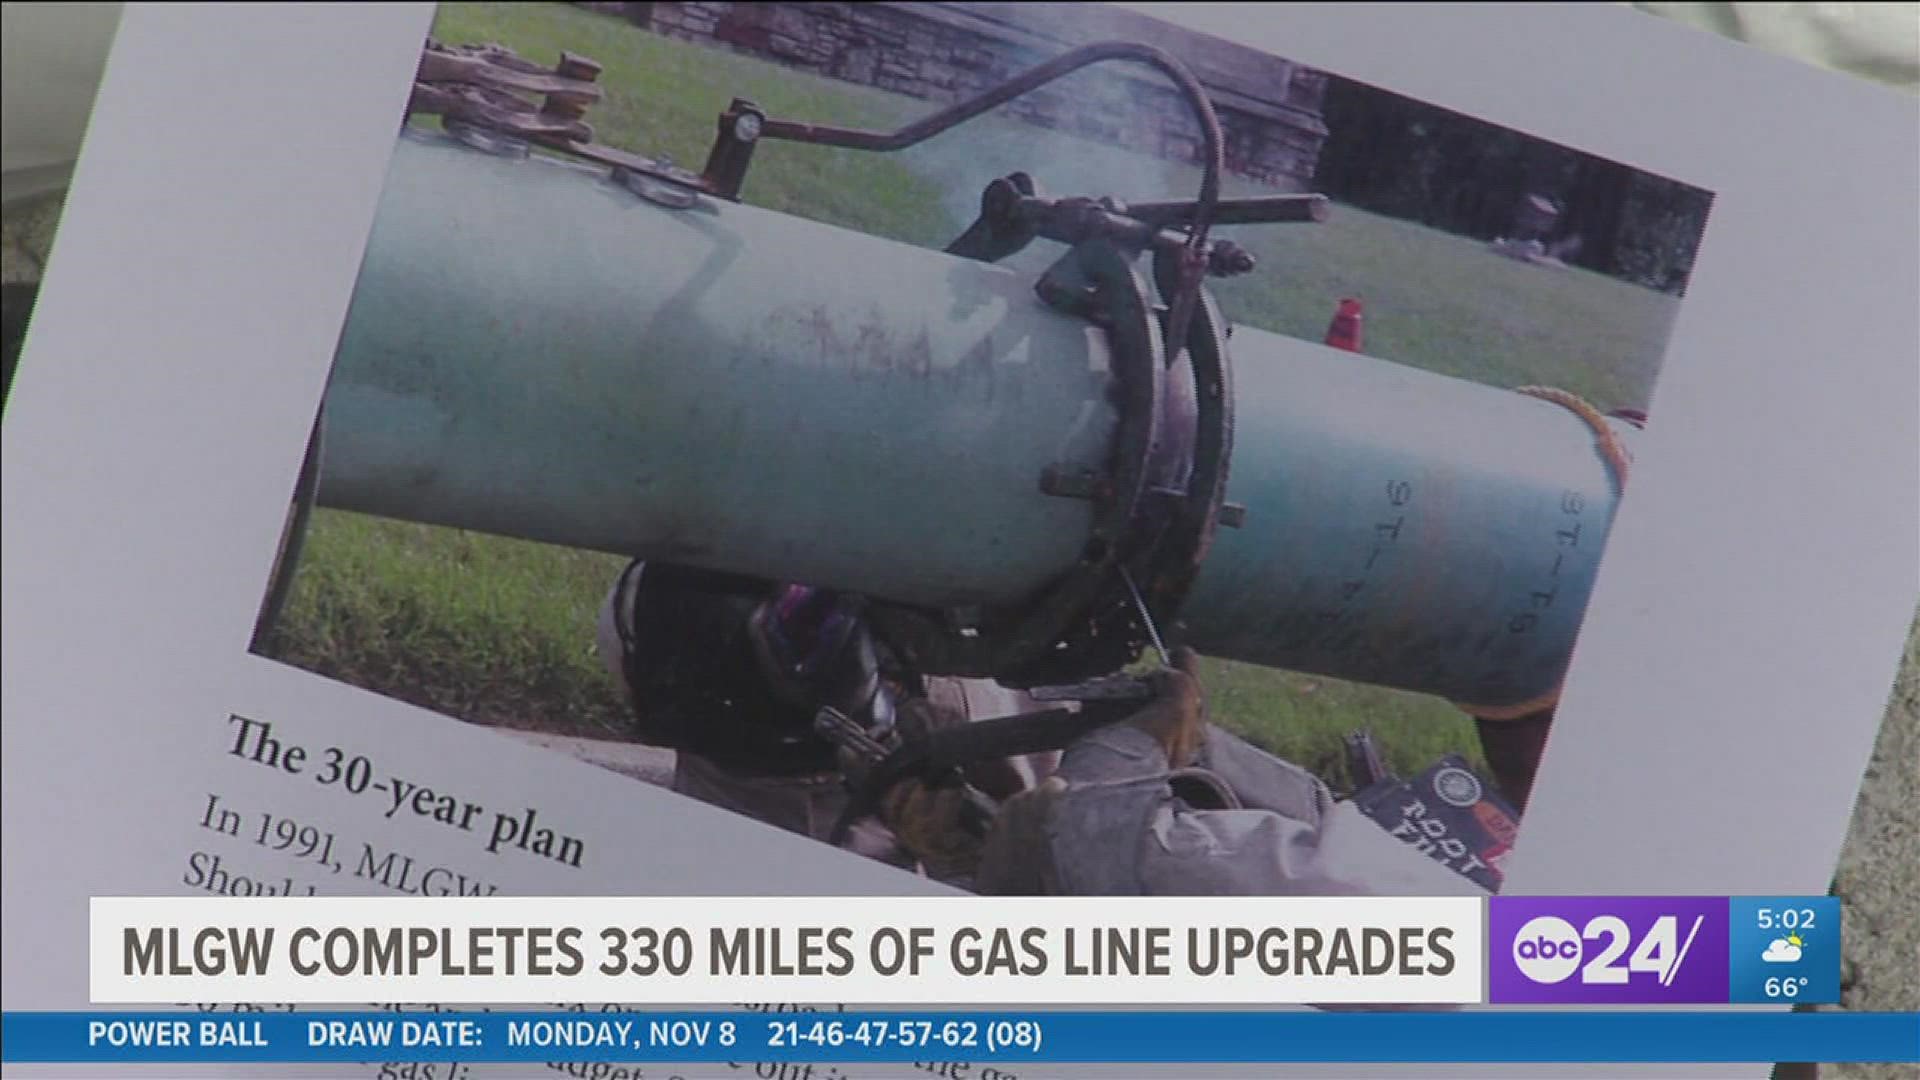 The utility company is finishing up the $100-million cast iron replacement of 330 miles of gas lines across the Mid-South.